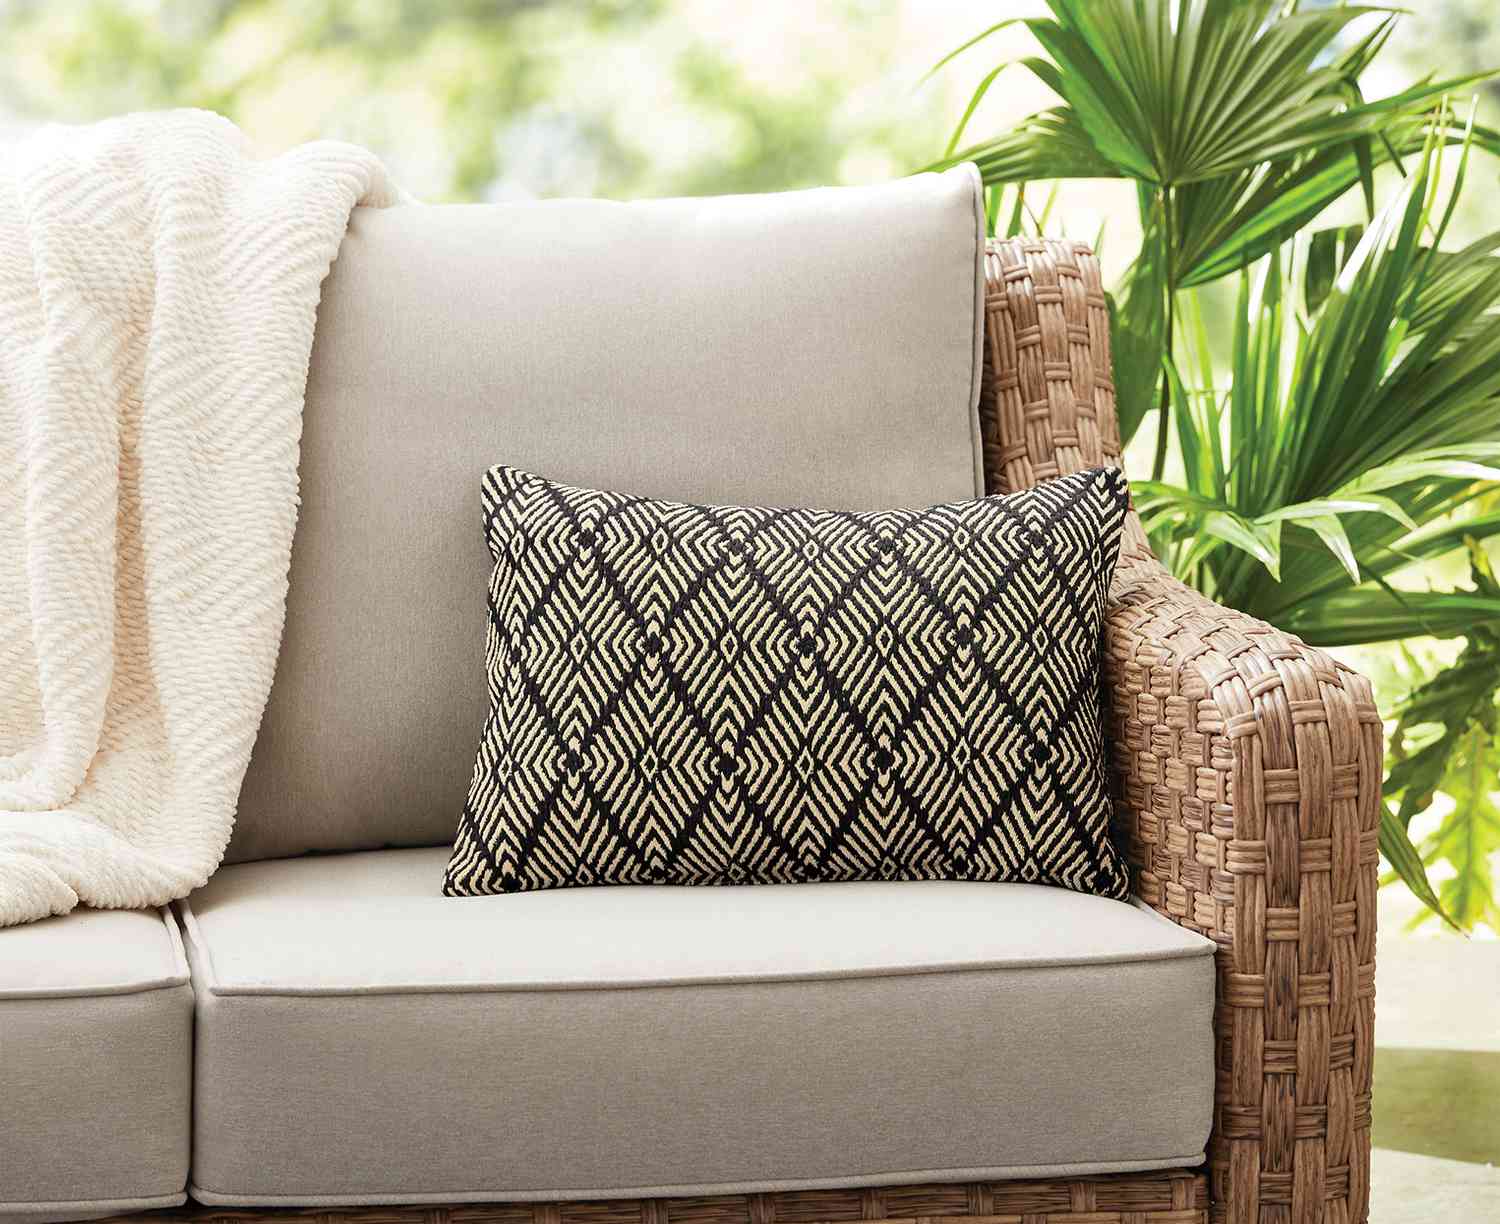 10 Best Outdoor Pillows To Spruce Up Your Patio In 2021 Better Homes Gardens - Outdoor Pillow Covers For Patio Furniture